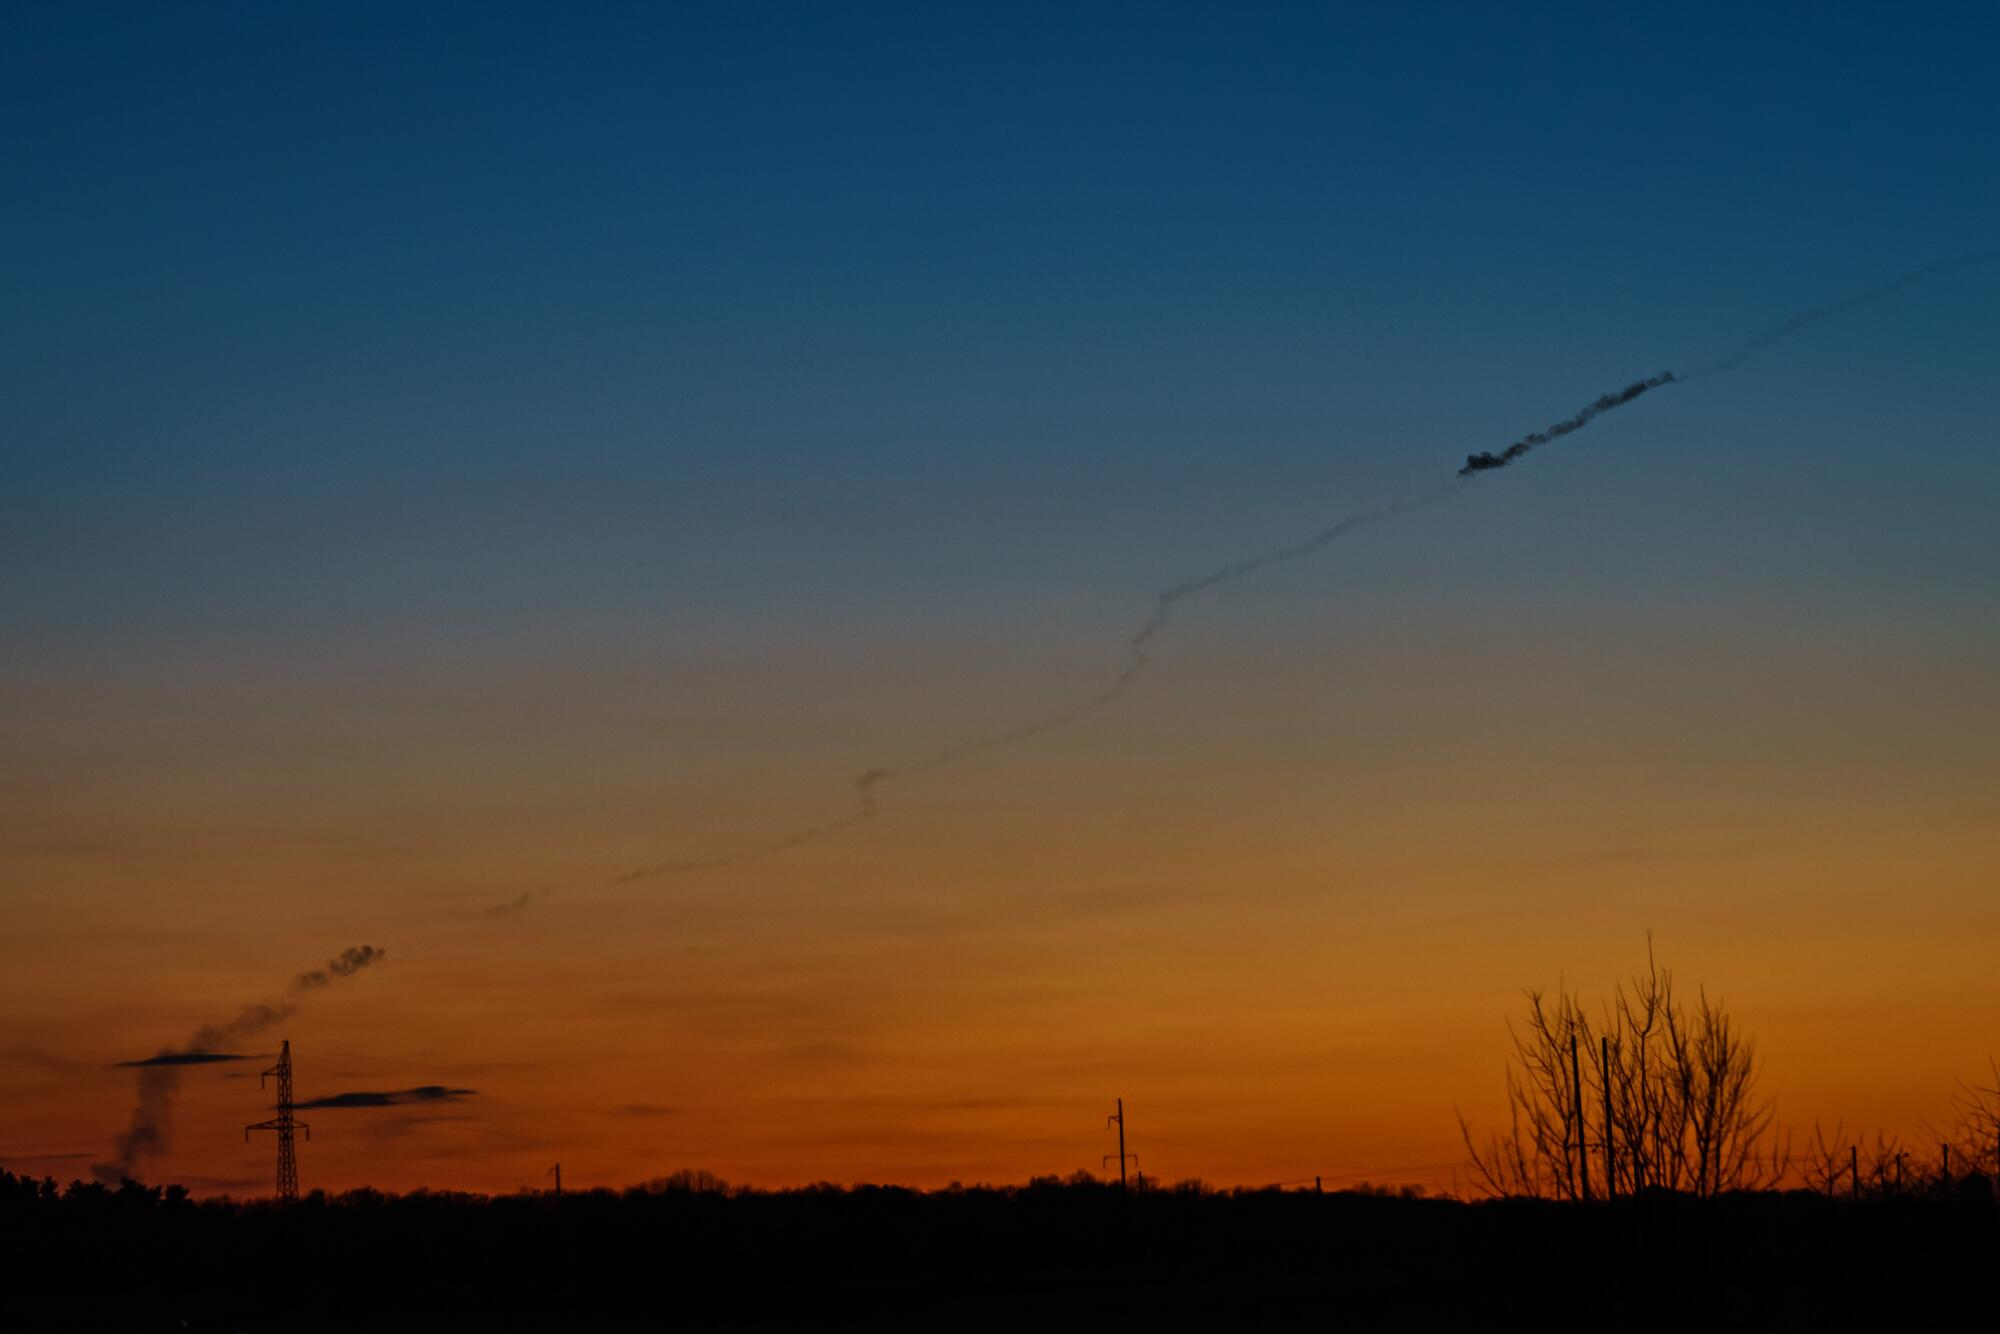 A smoke trail from a rocket launch in the evening sky colored orange, yellow and blue in Baryshivka, Ukraine.